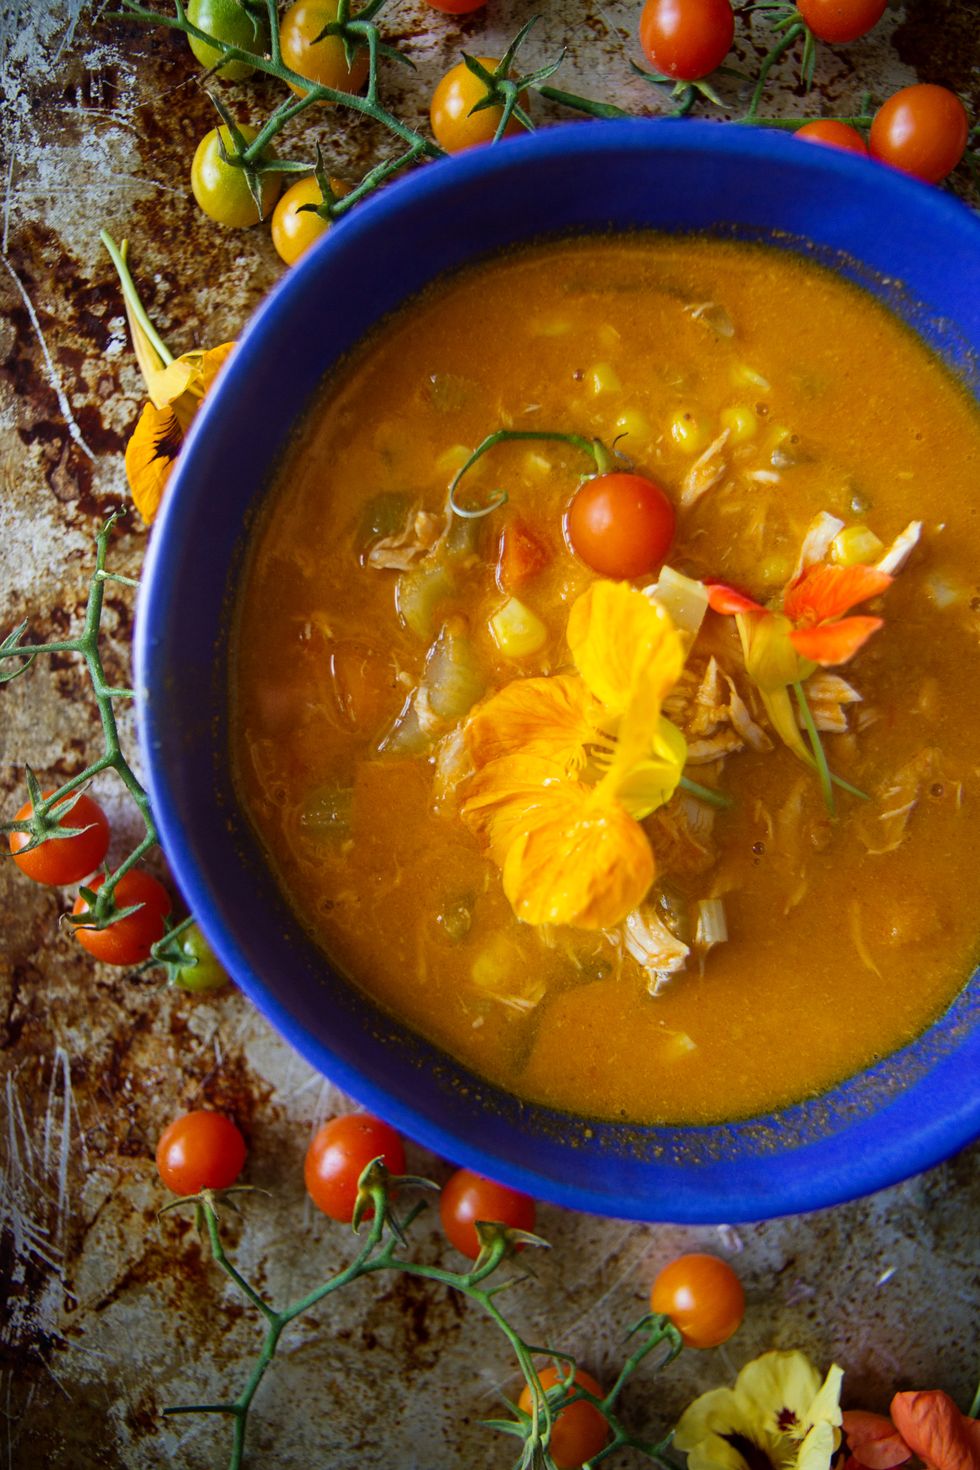 Tomato Chicken Vegetable Soup